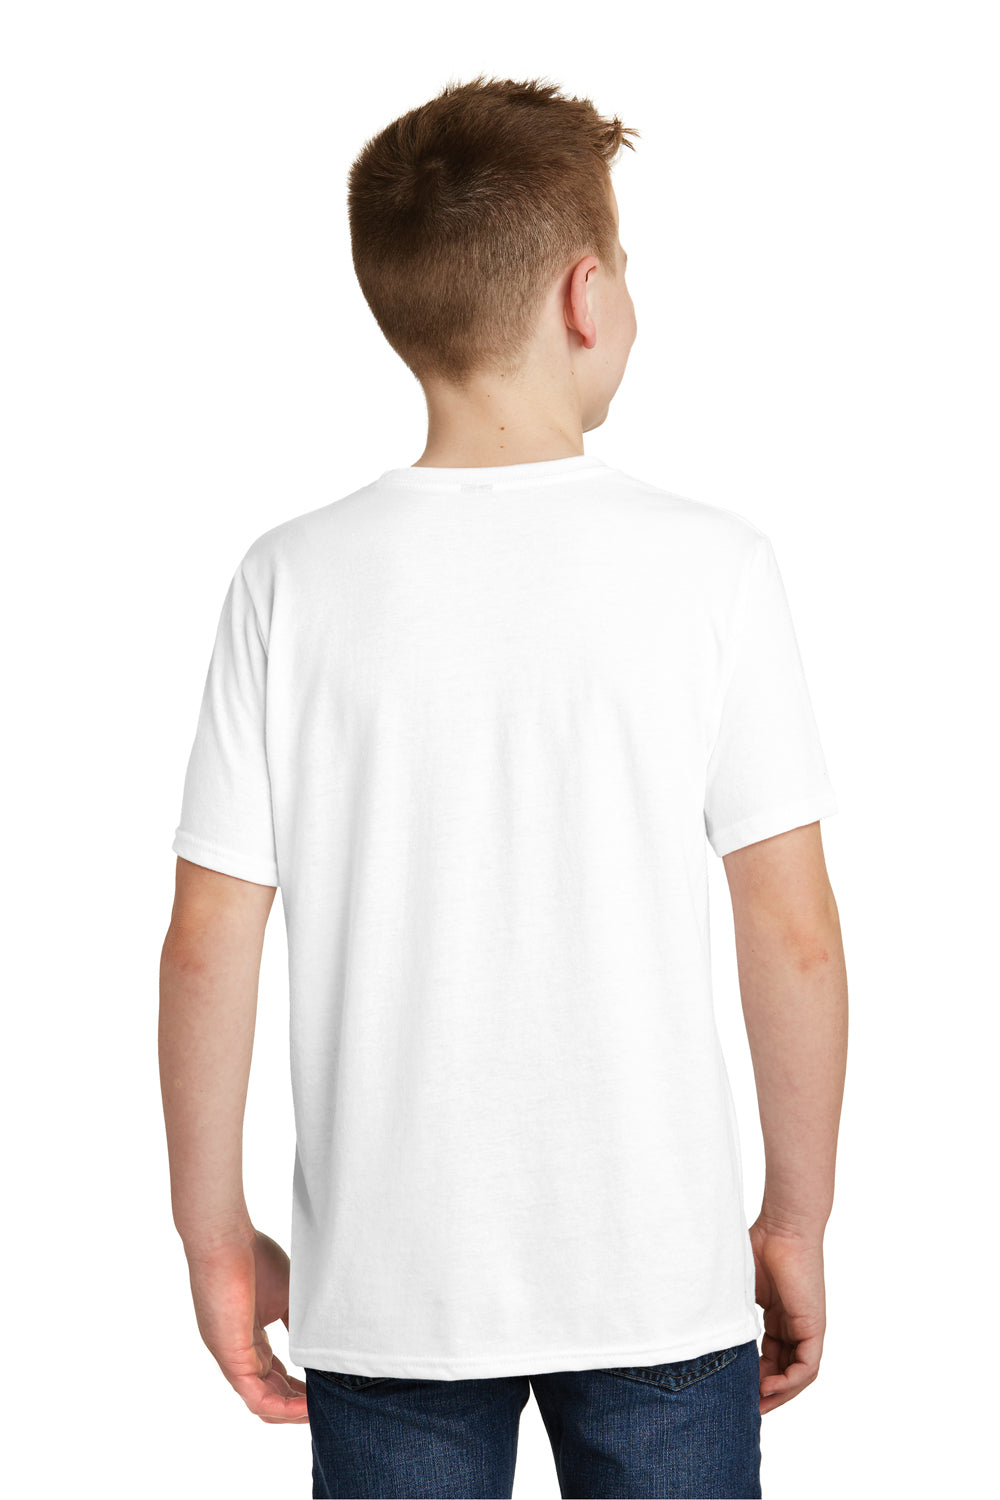 District DT6000Y Youth Very Important Short Sleeve Crewneck T-Shirt White Back